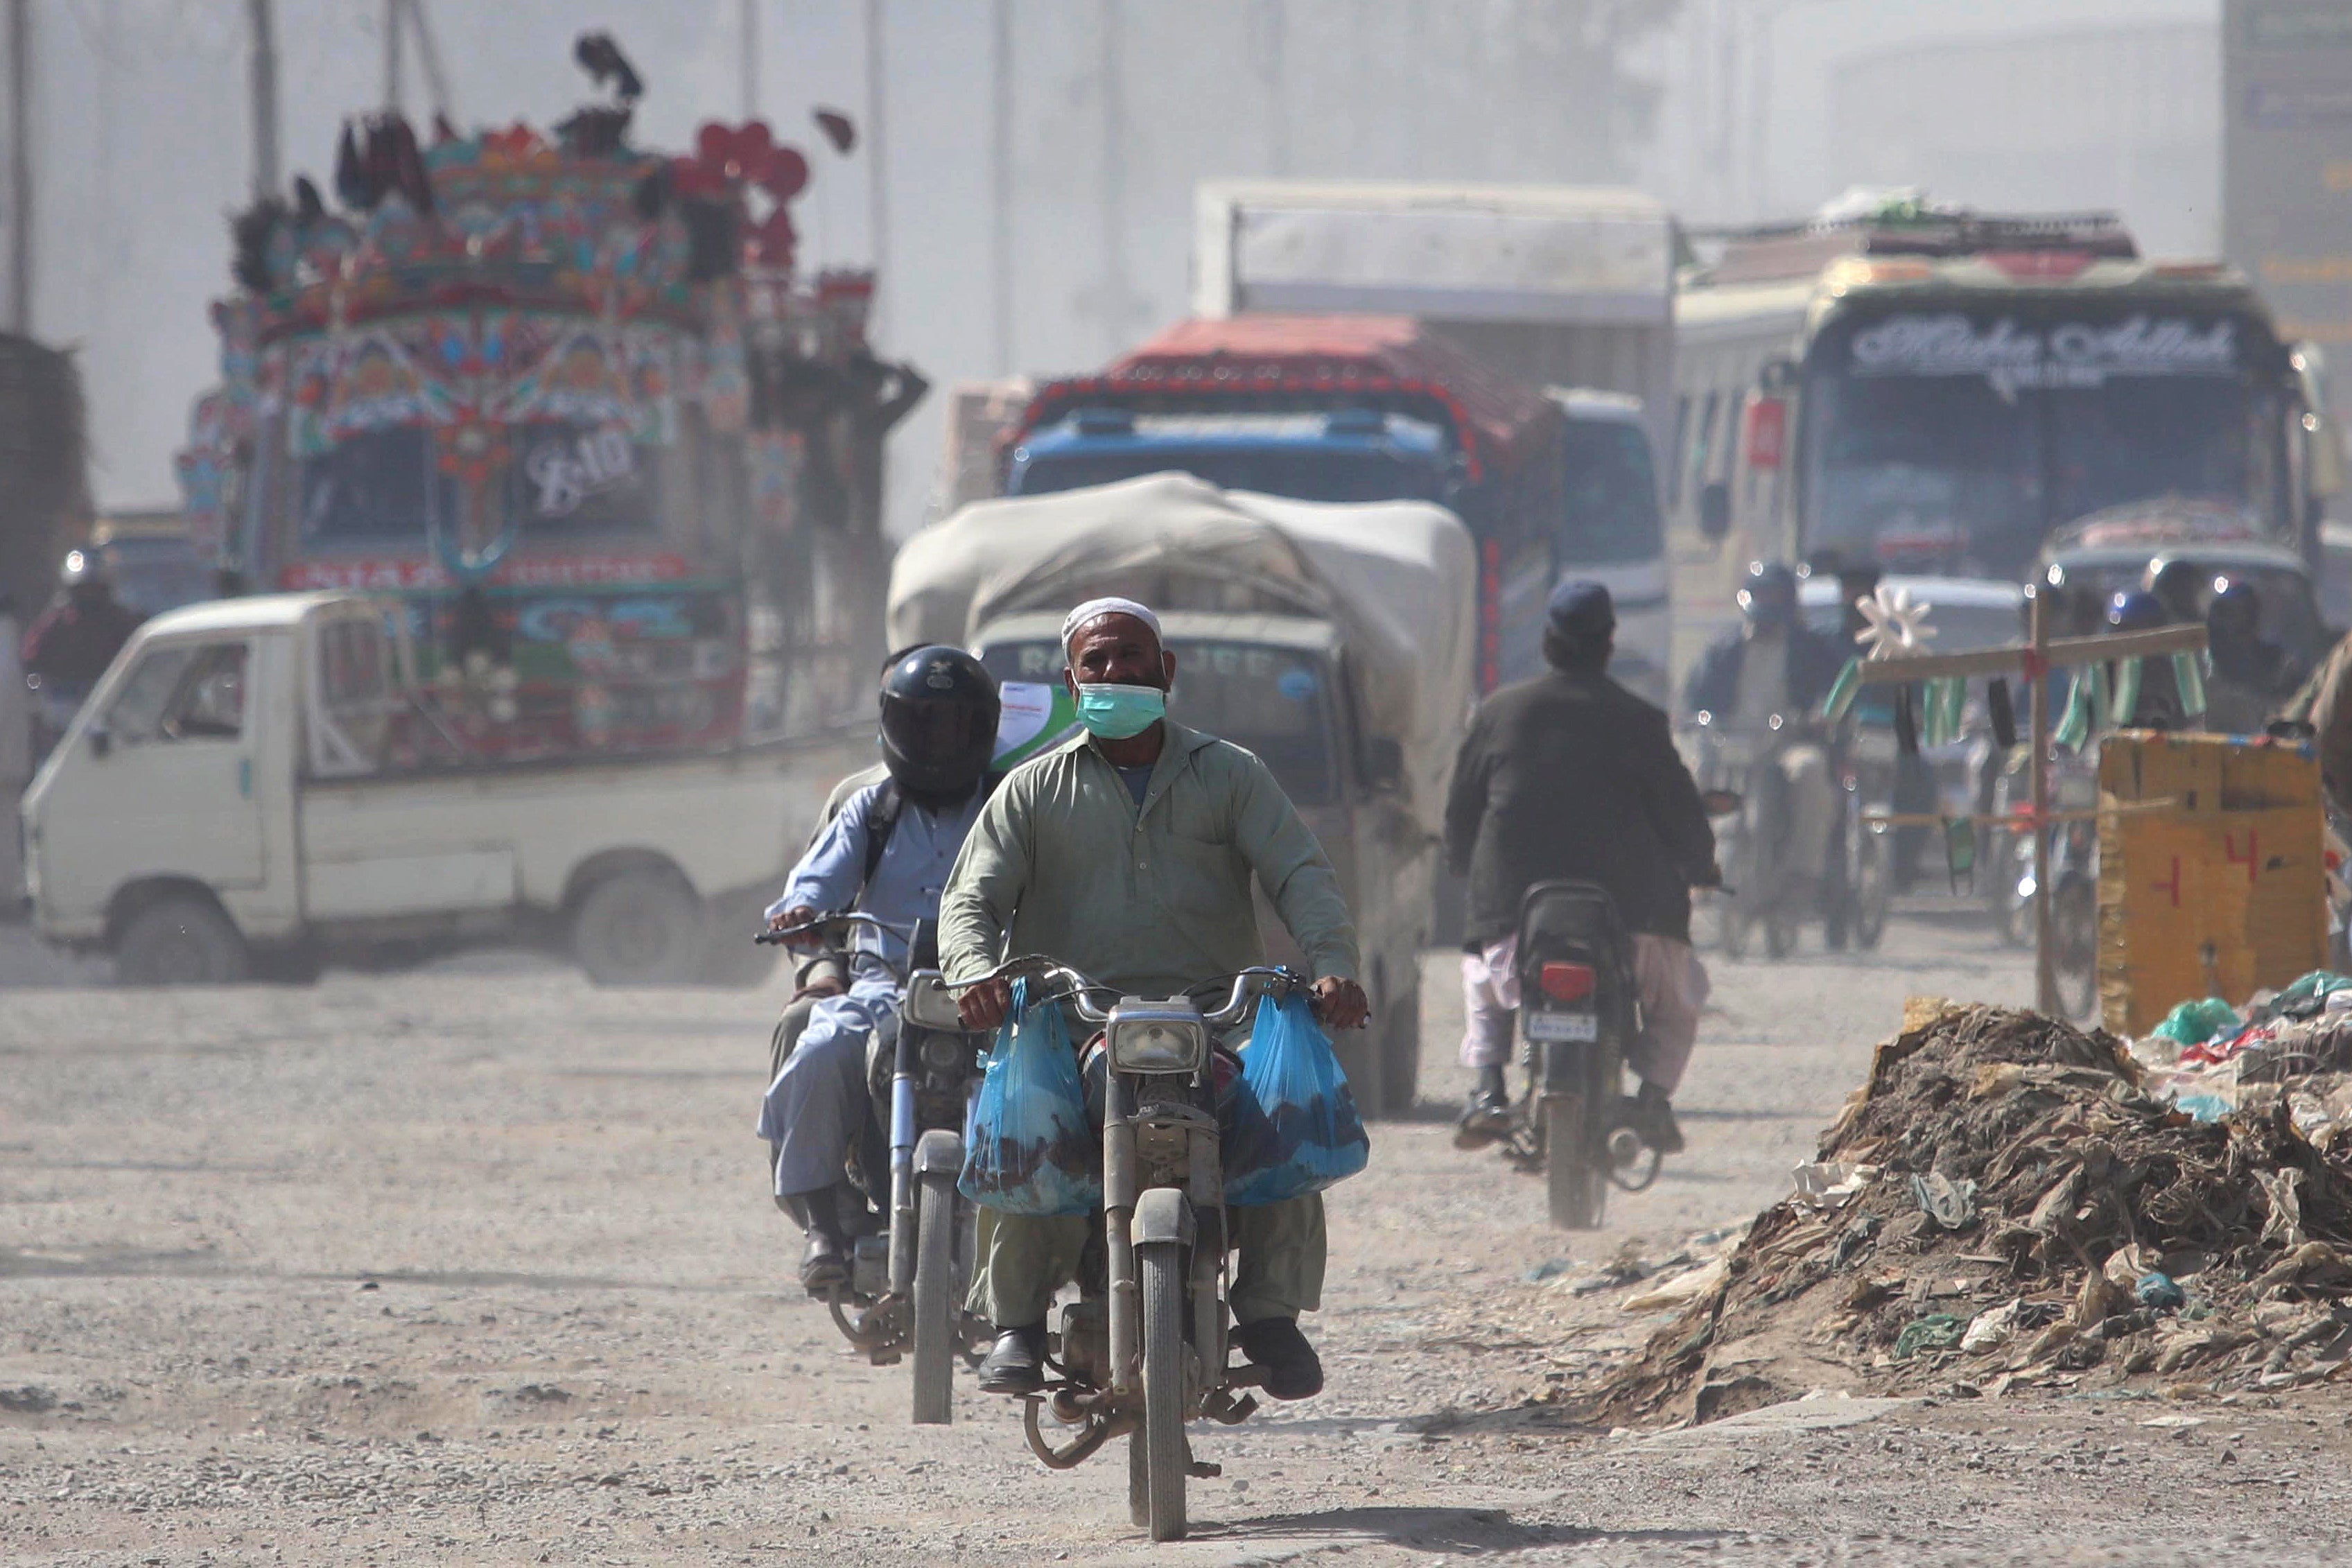 A man wears a face mask as he rides a motorcycle amid the ongoing COVID-19 pandemic in Pakistan